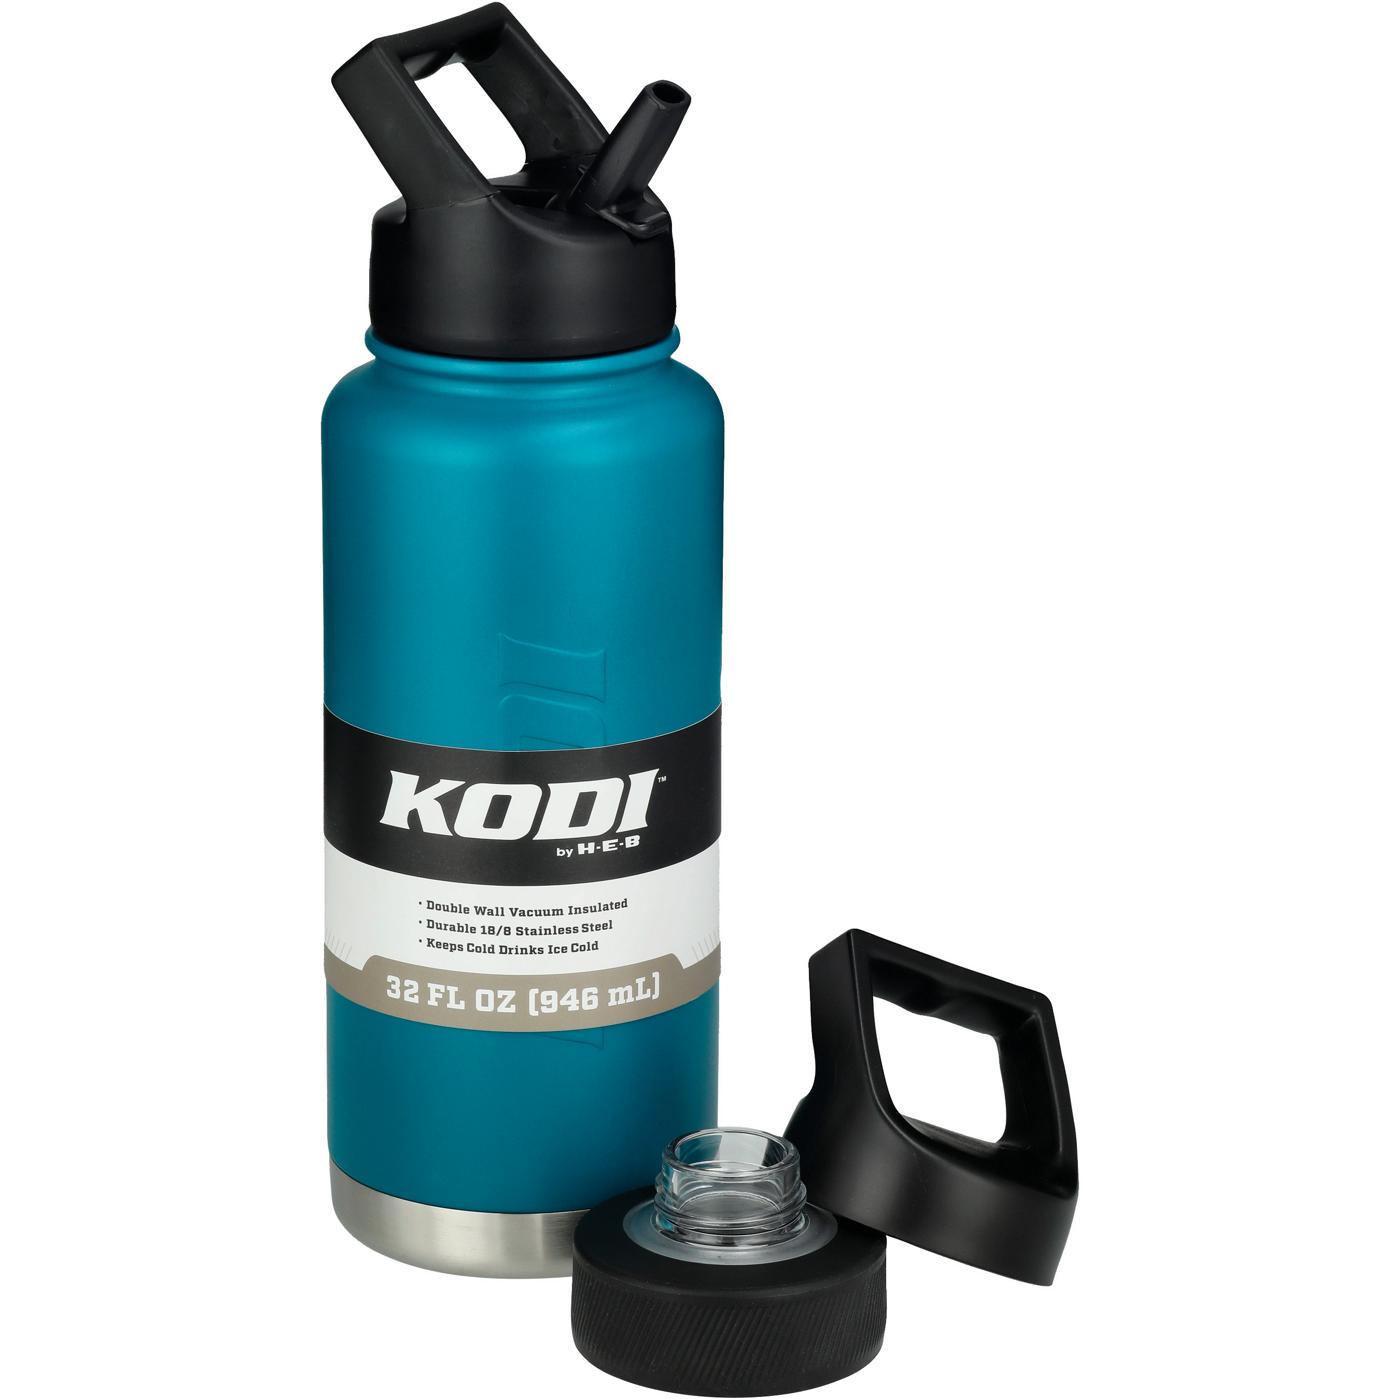 KODI by H-E-B Stainless Steel Water Bottle - Deep Turquoise - Shop Travel &  To-Go at H-E-B